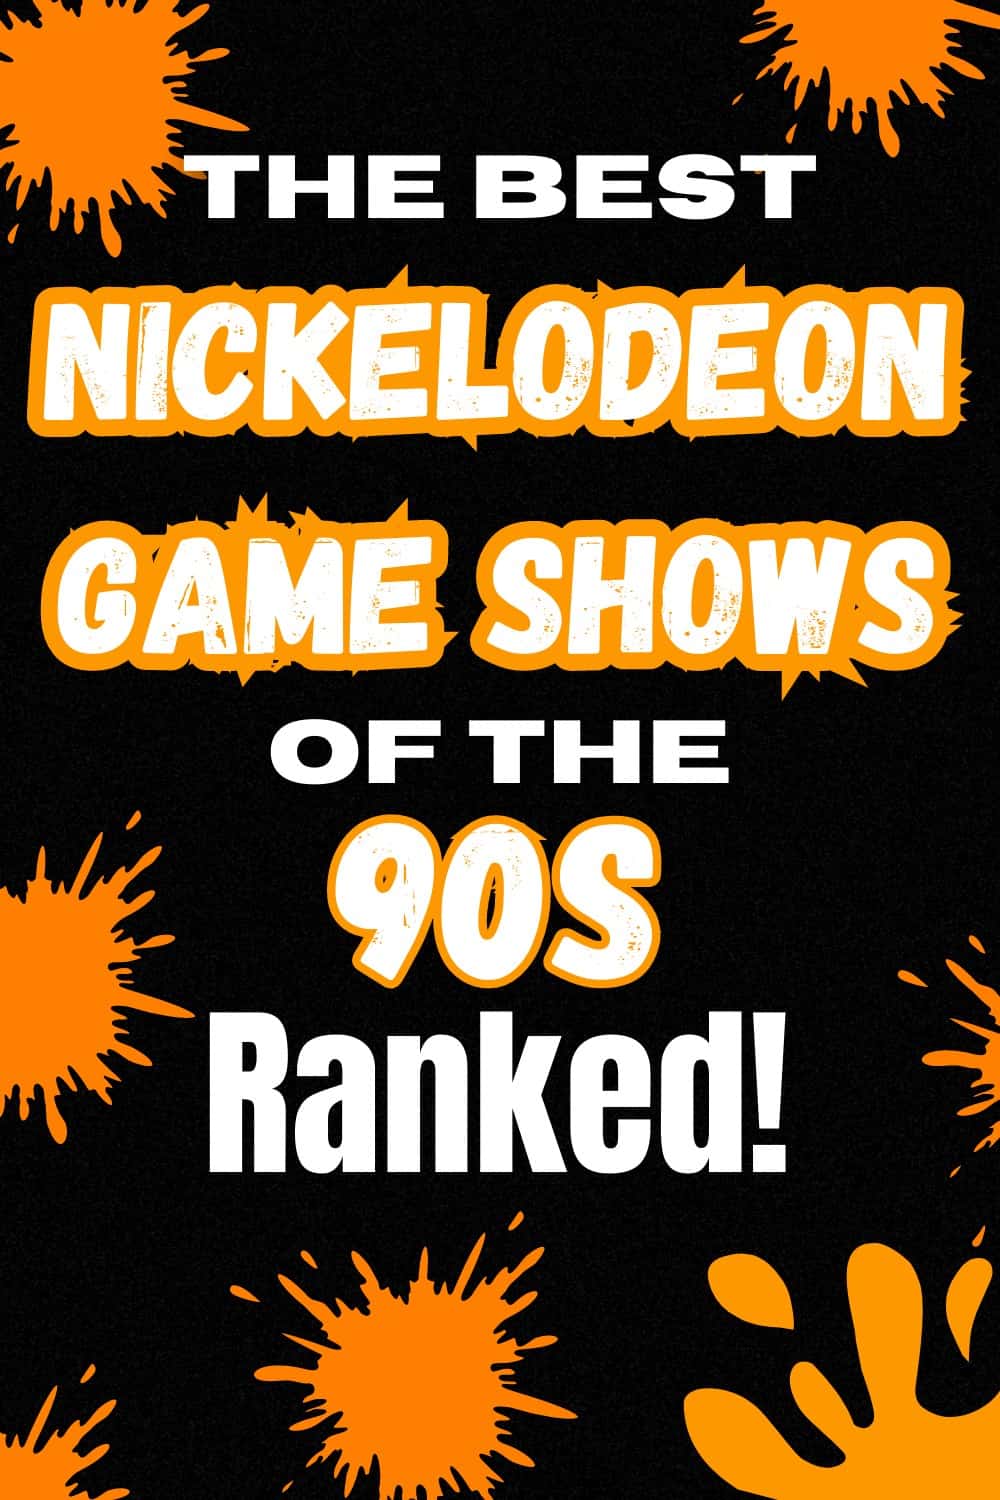 List of 90s Nickelodeon Game Shows